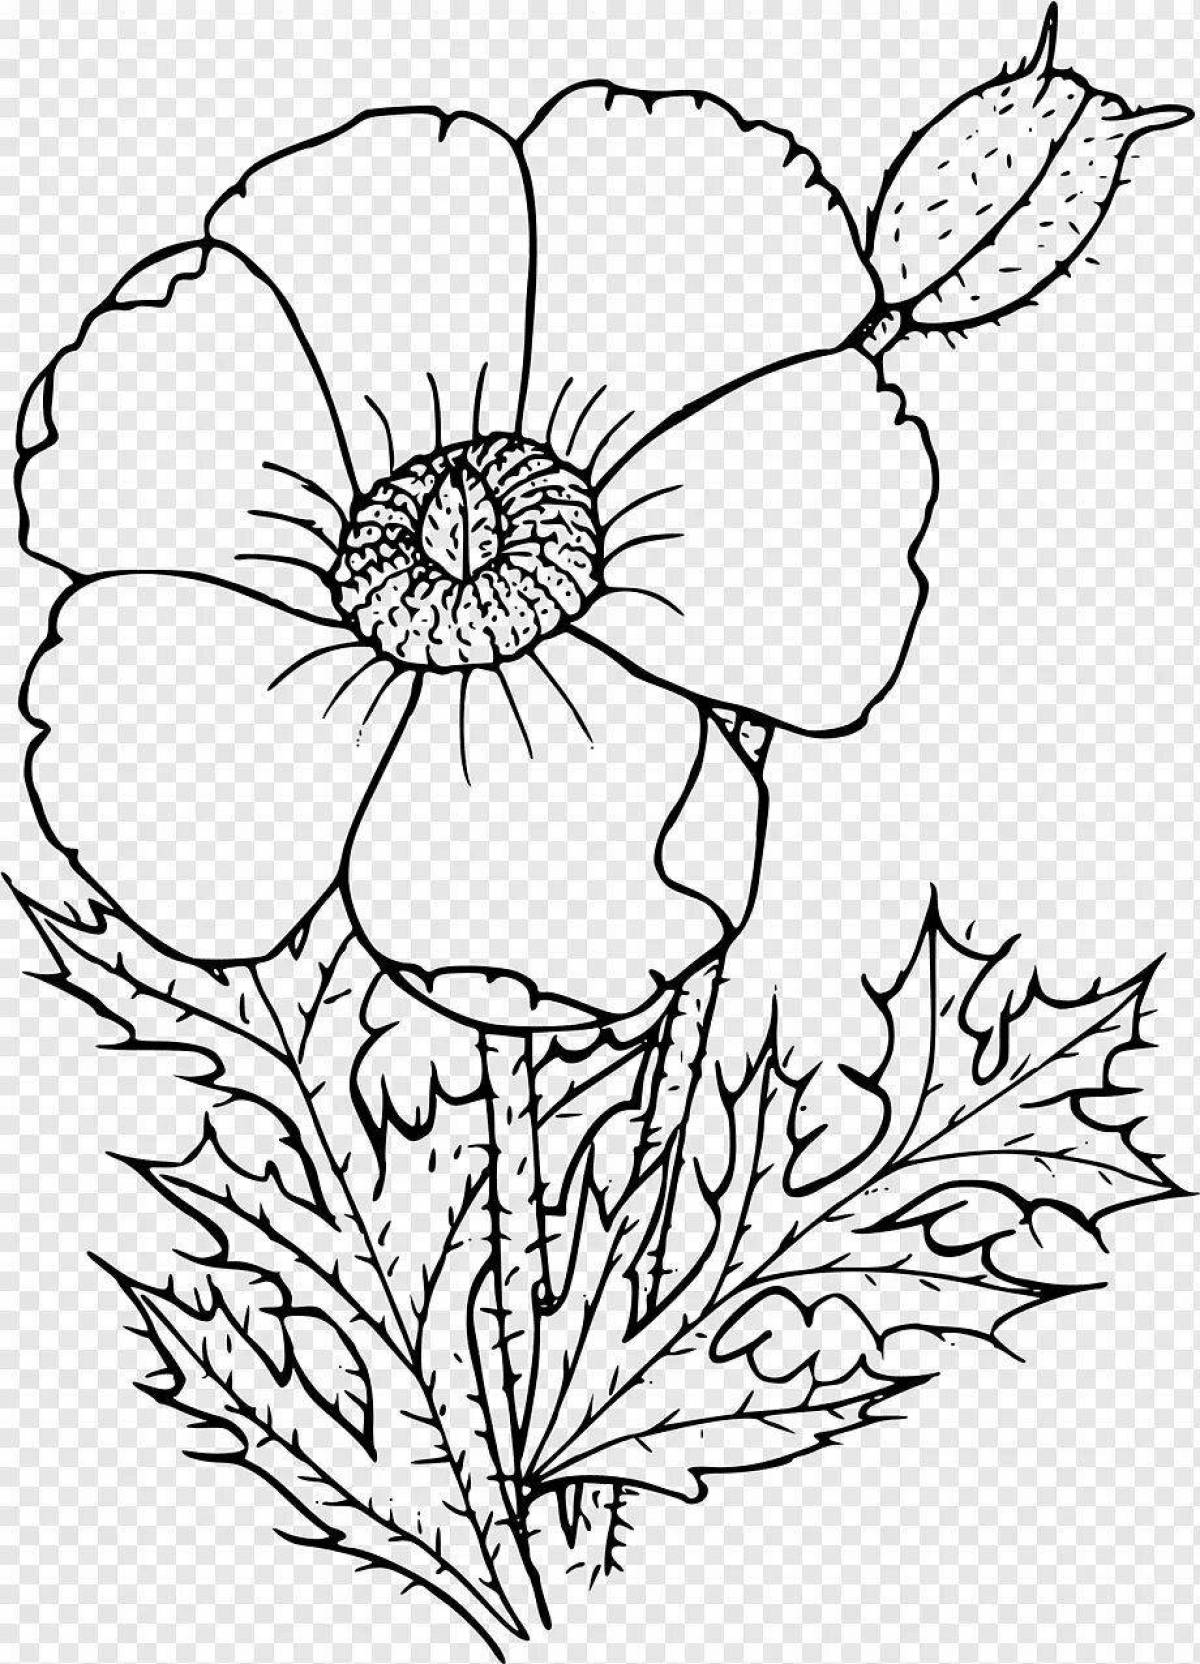 A wonderful poppy coloring book for kids